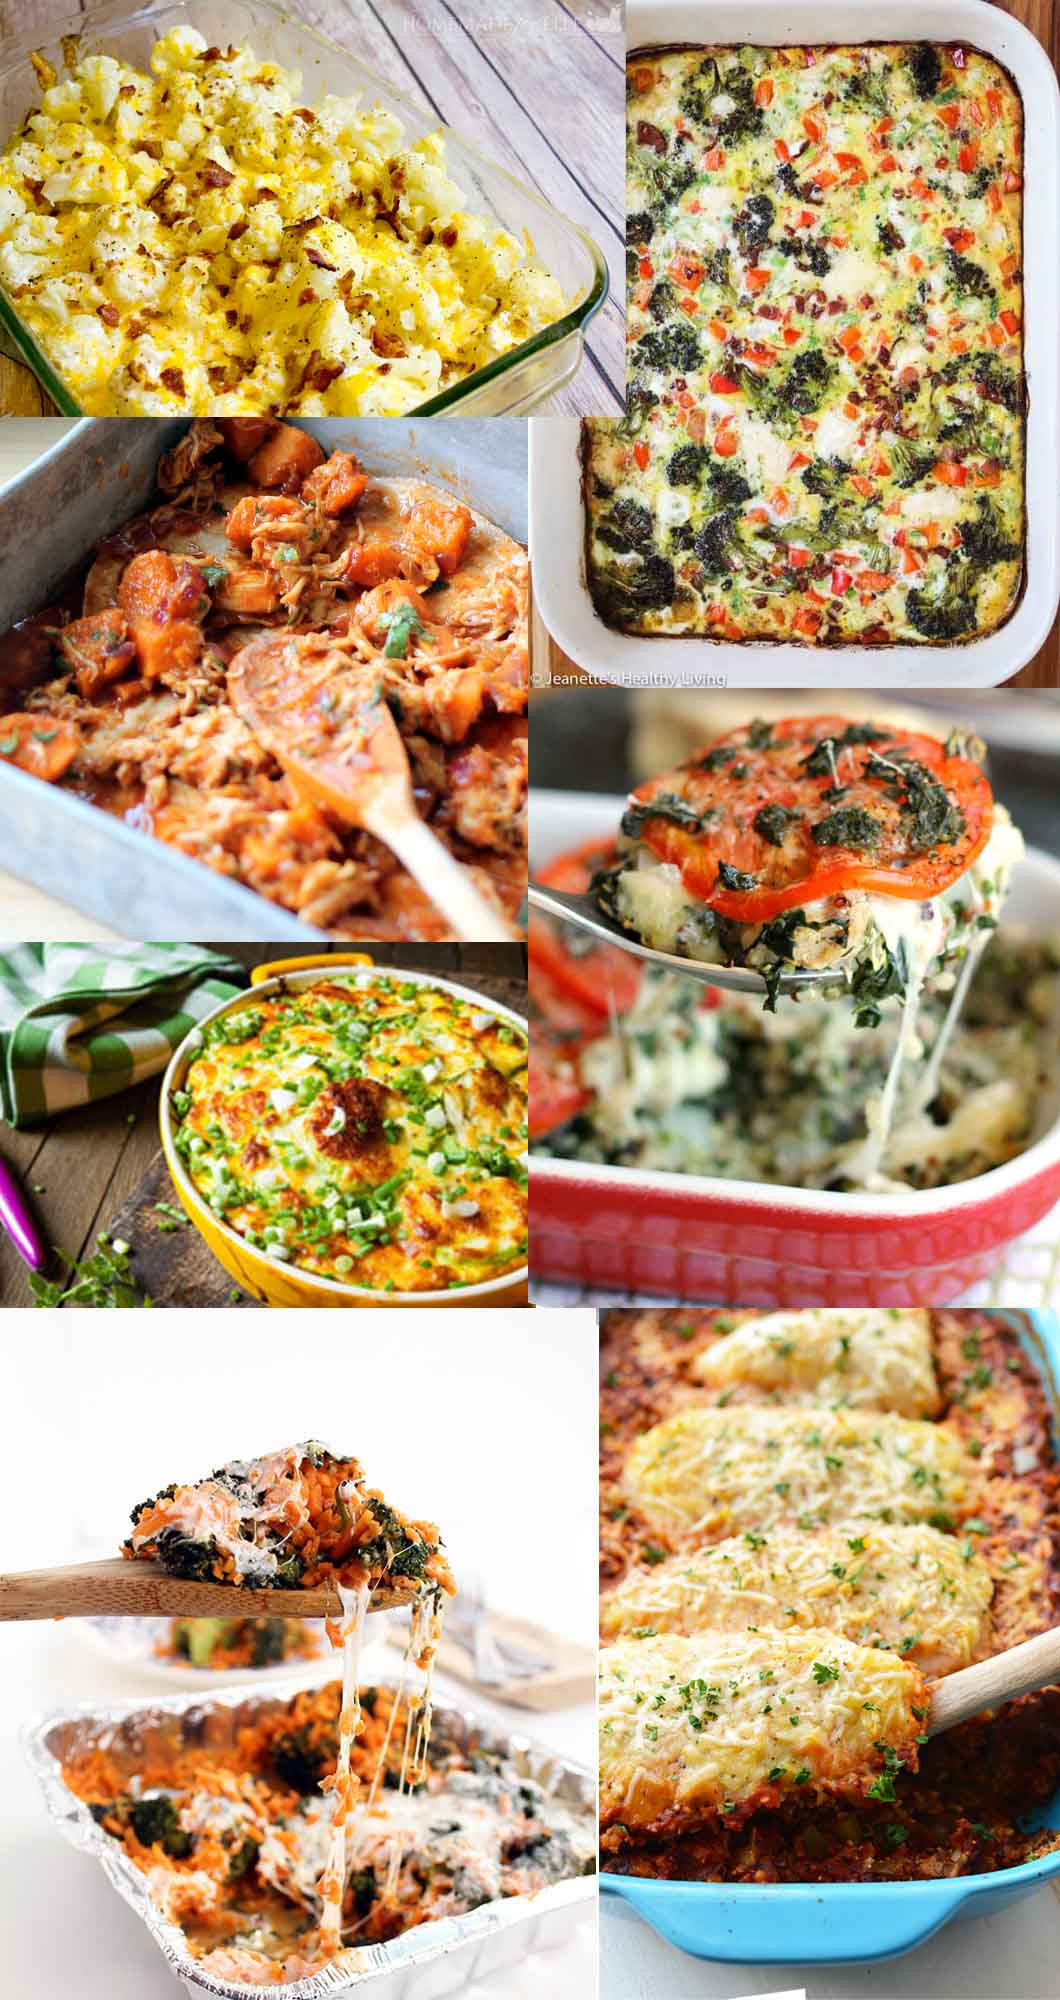 Kid Friendly Casseroles Healthy
 20 Healthy Casseroles For Your Whole Family